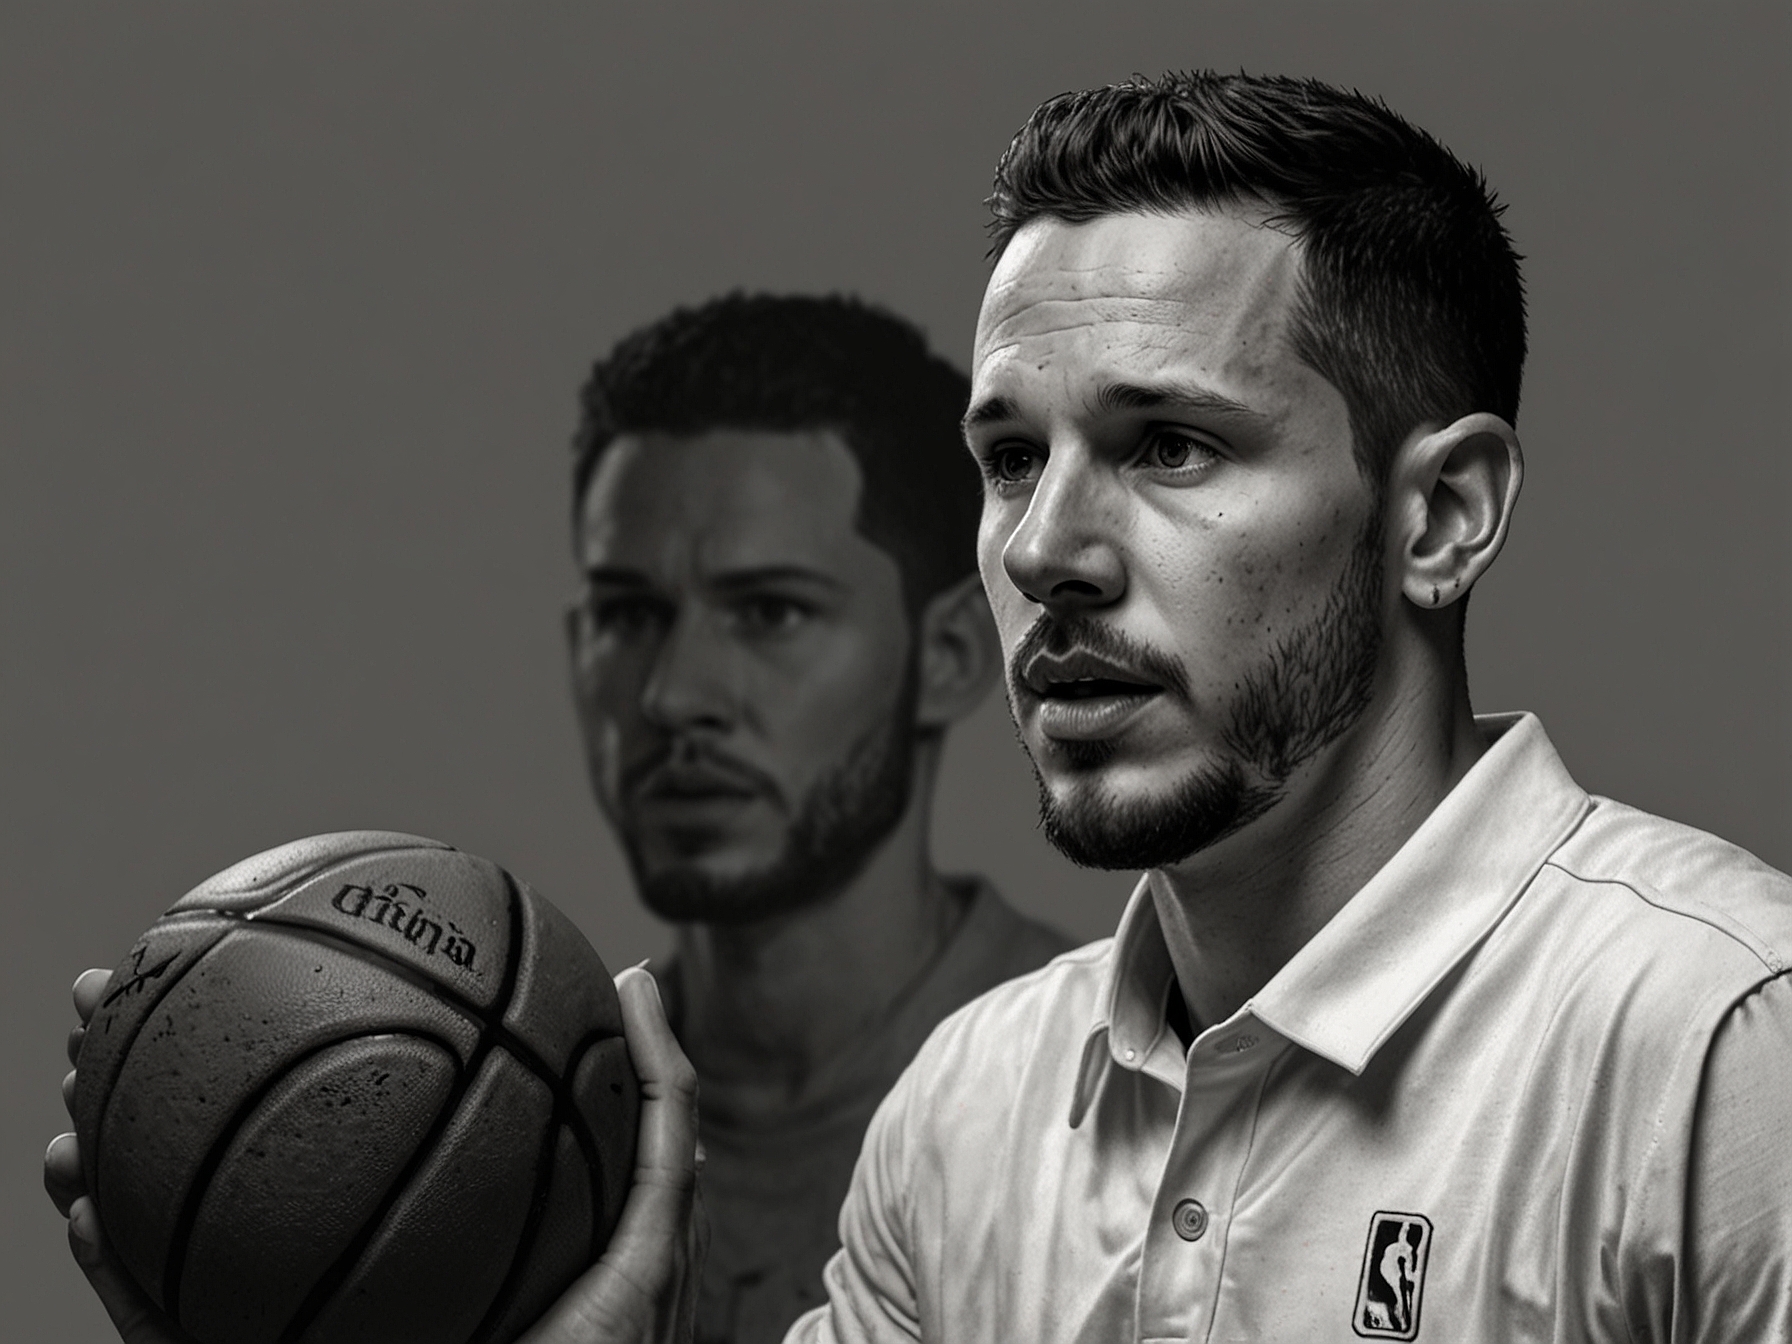 JJ Redick discussing game strategy during a podcast, showcasing his deep understanding and articulate insights into basketball tactics and player psychology.